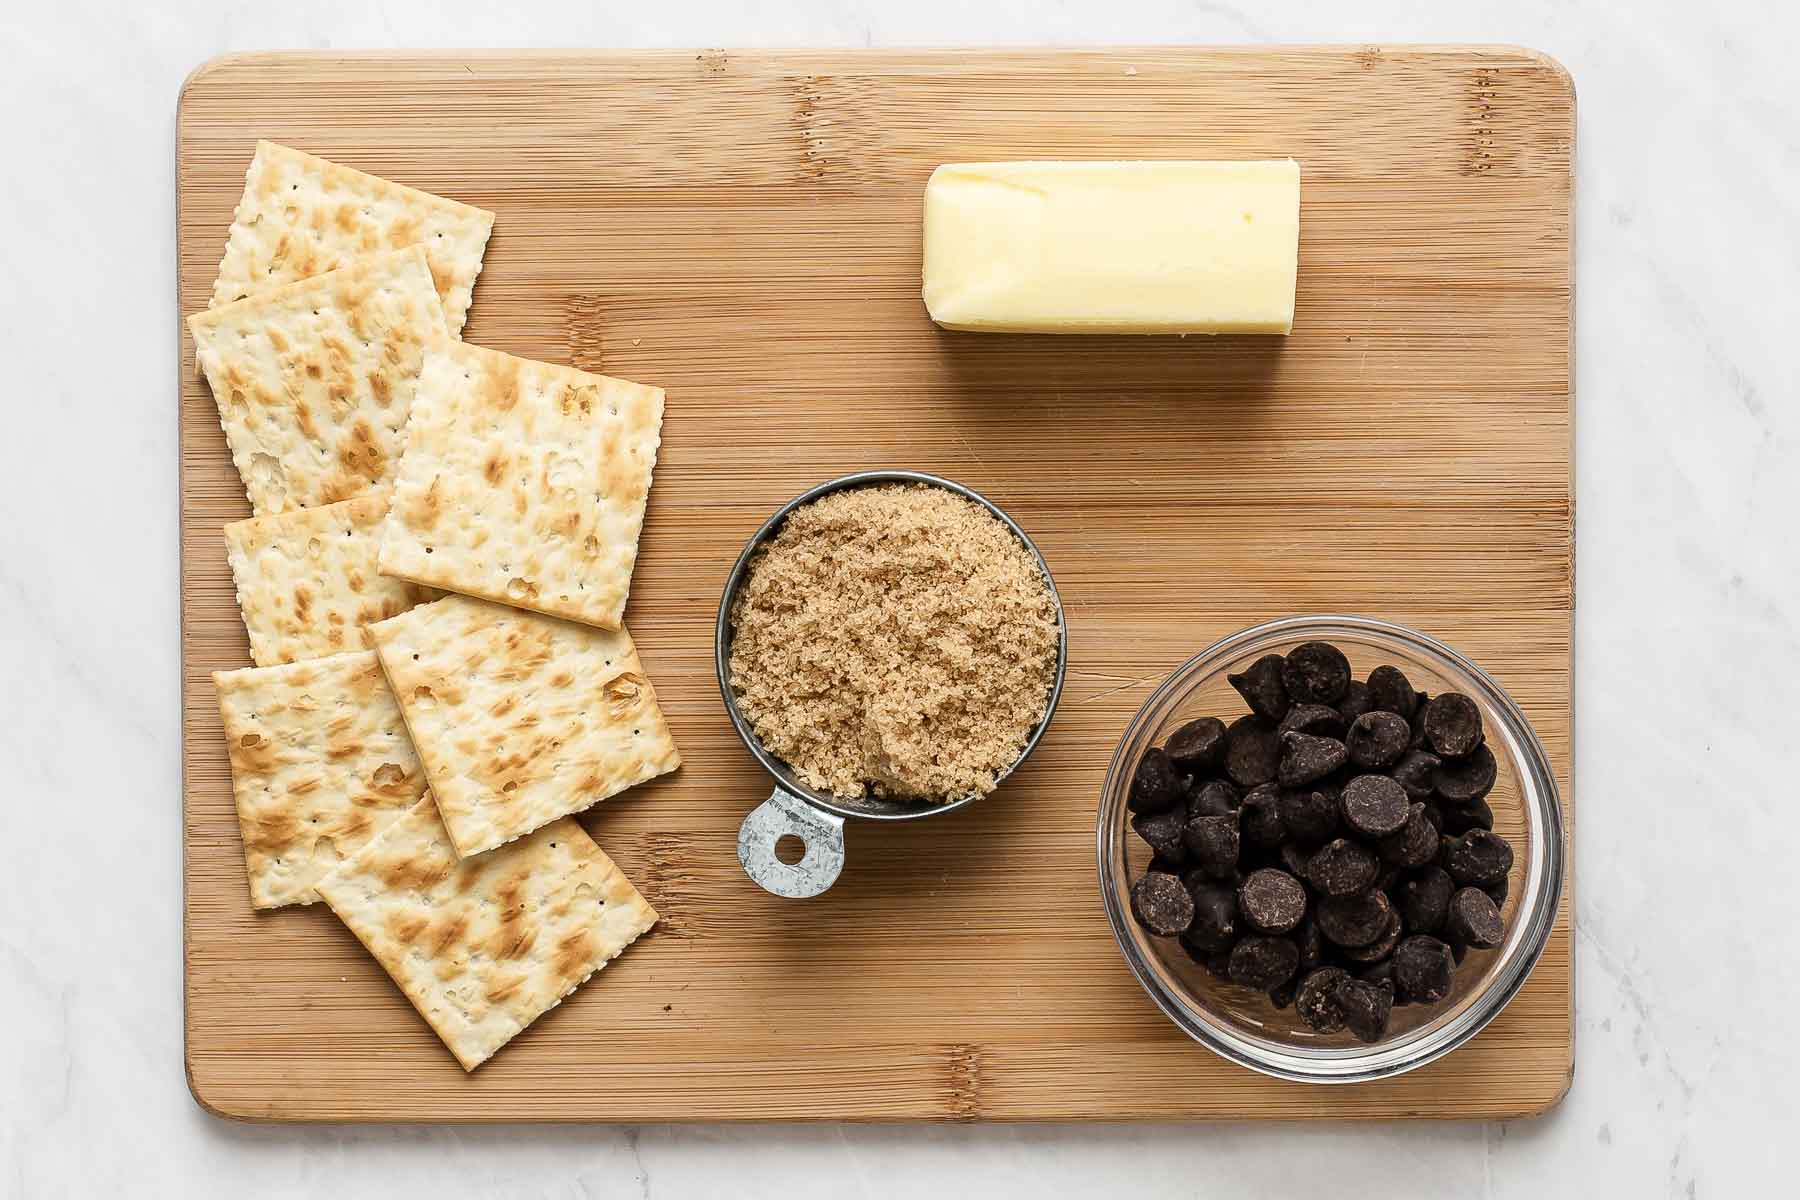 Ingredients for saltine toffee on wooden cutting board.